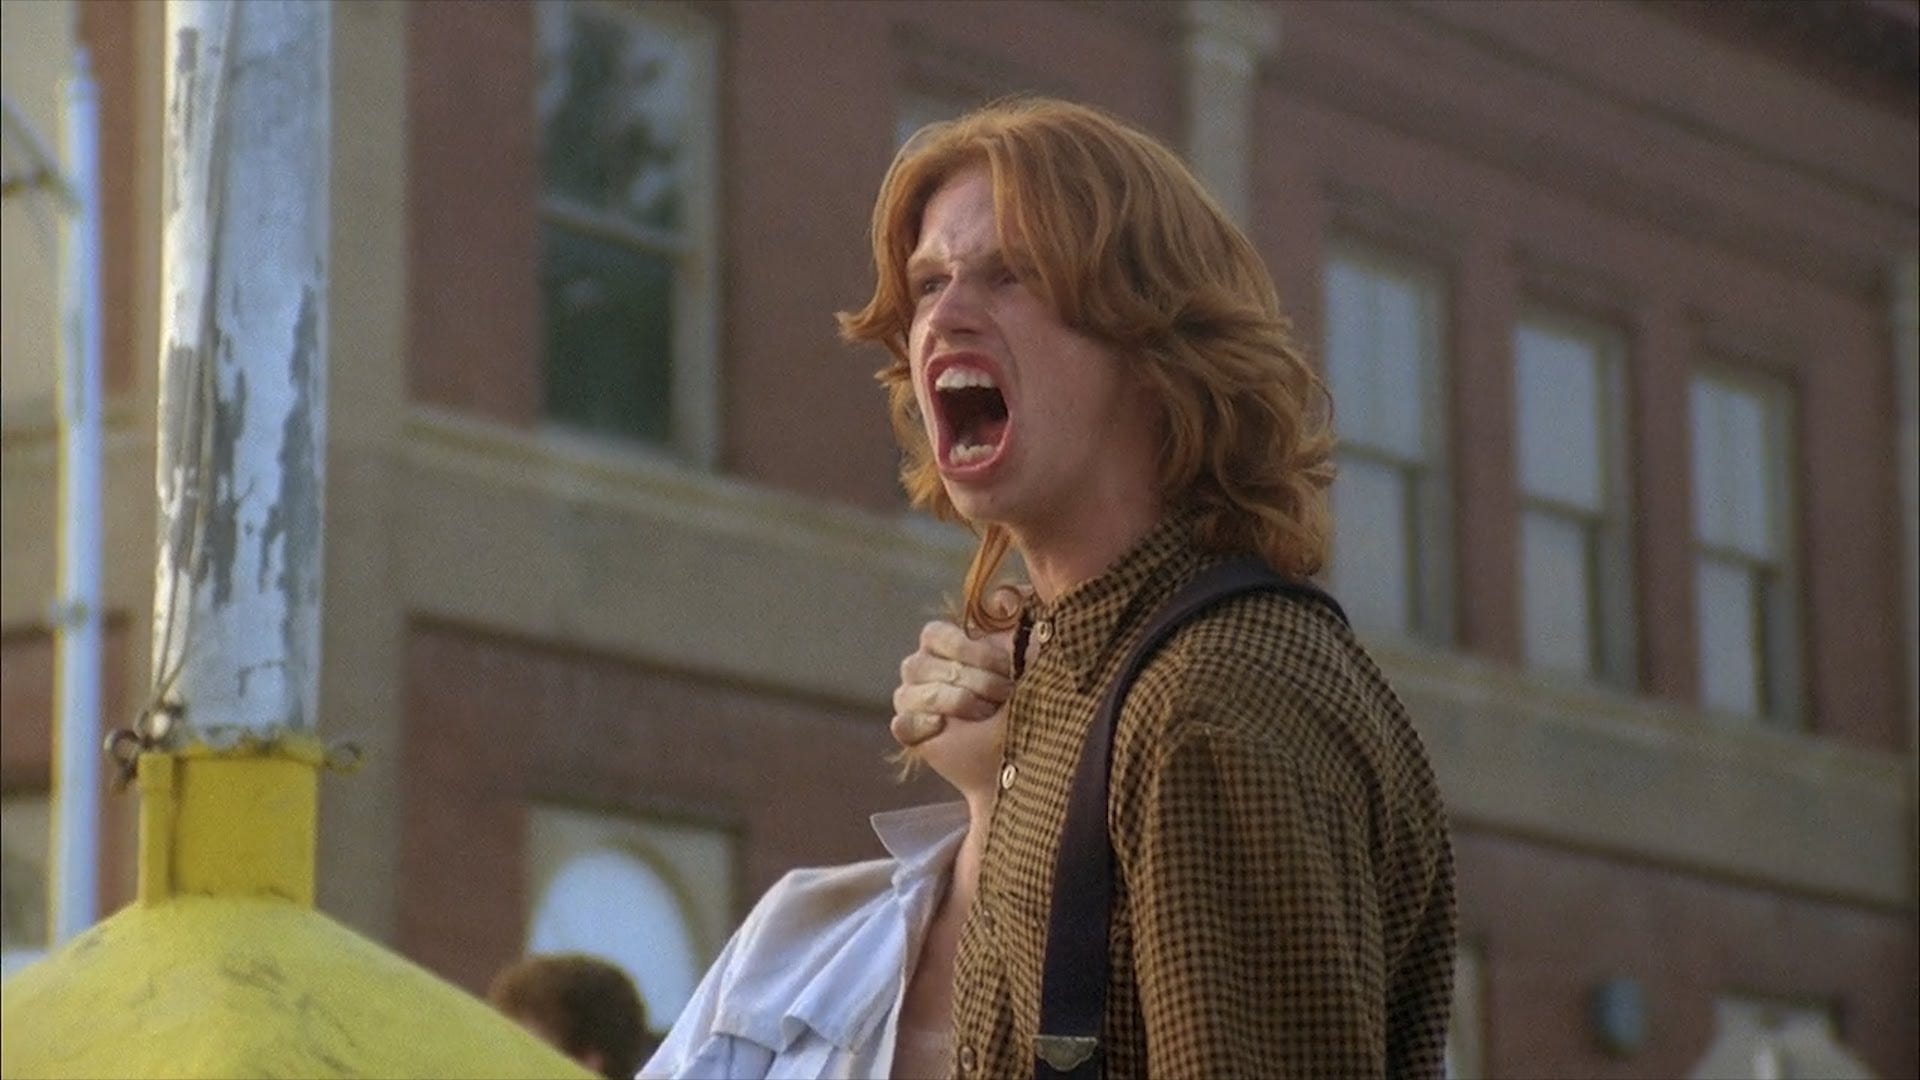 Malachai (Courtney Gains) and the other Children of the Corn go on a murderous rampage led by a religious zealot.